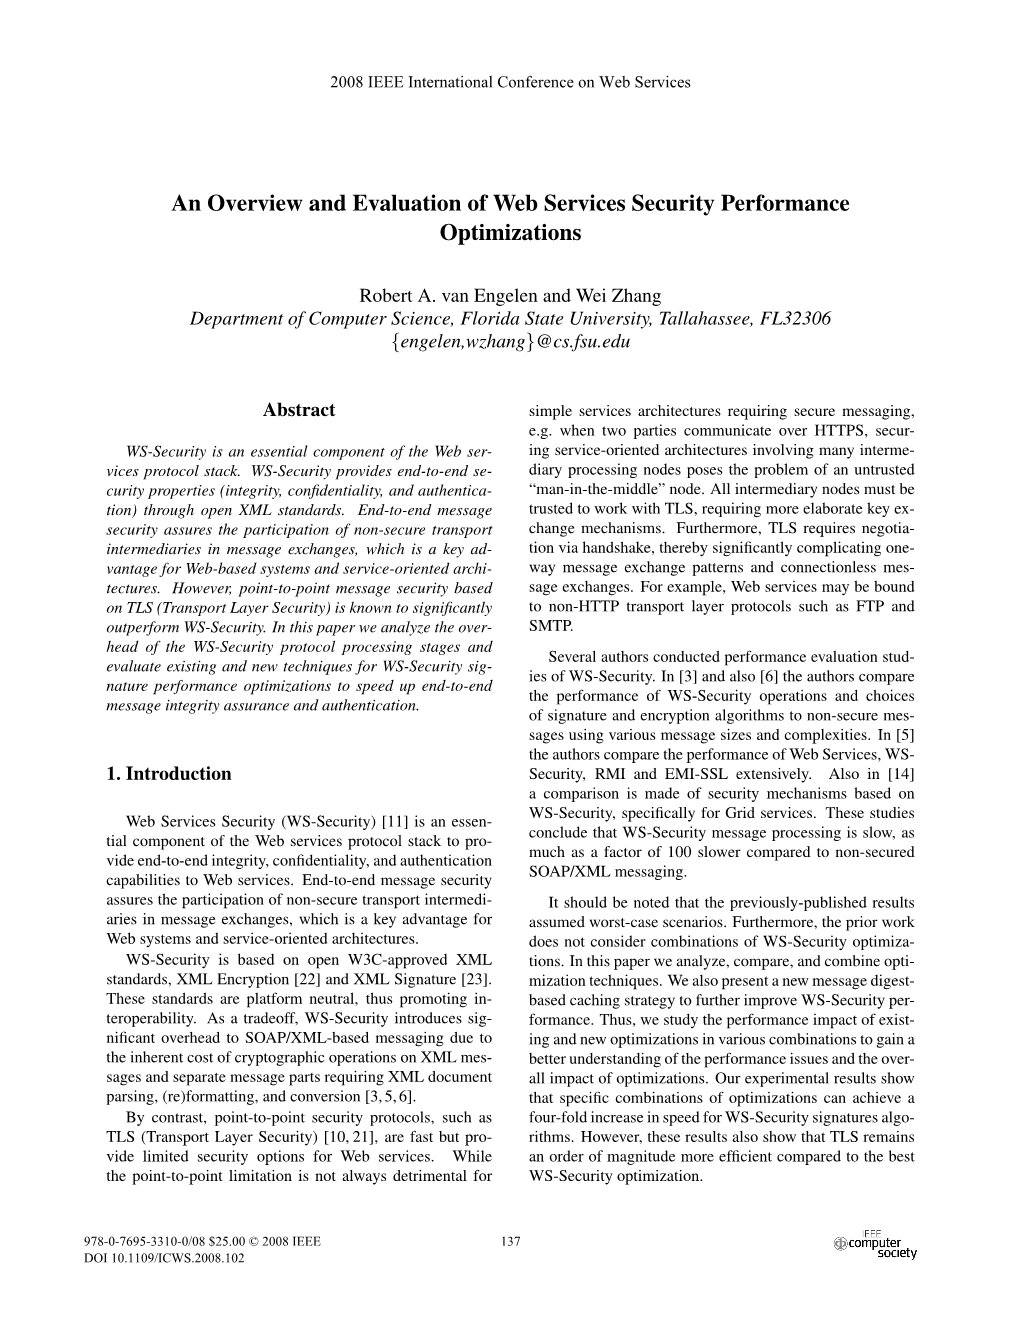 An Overview and Evaluation of Web Services Security Performance Optimizations